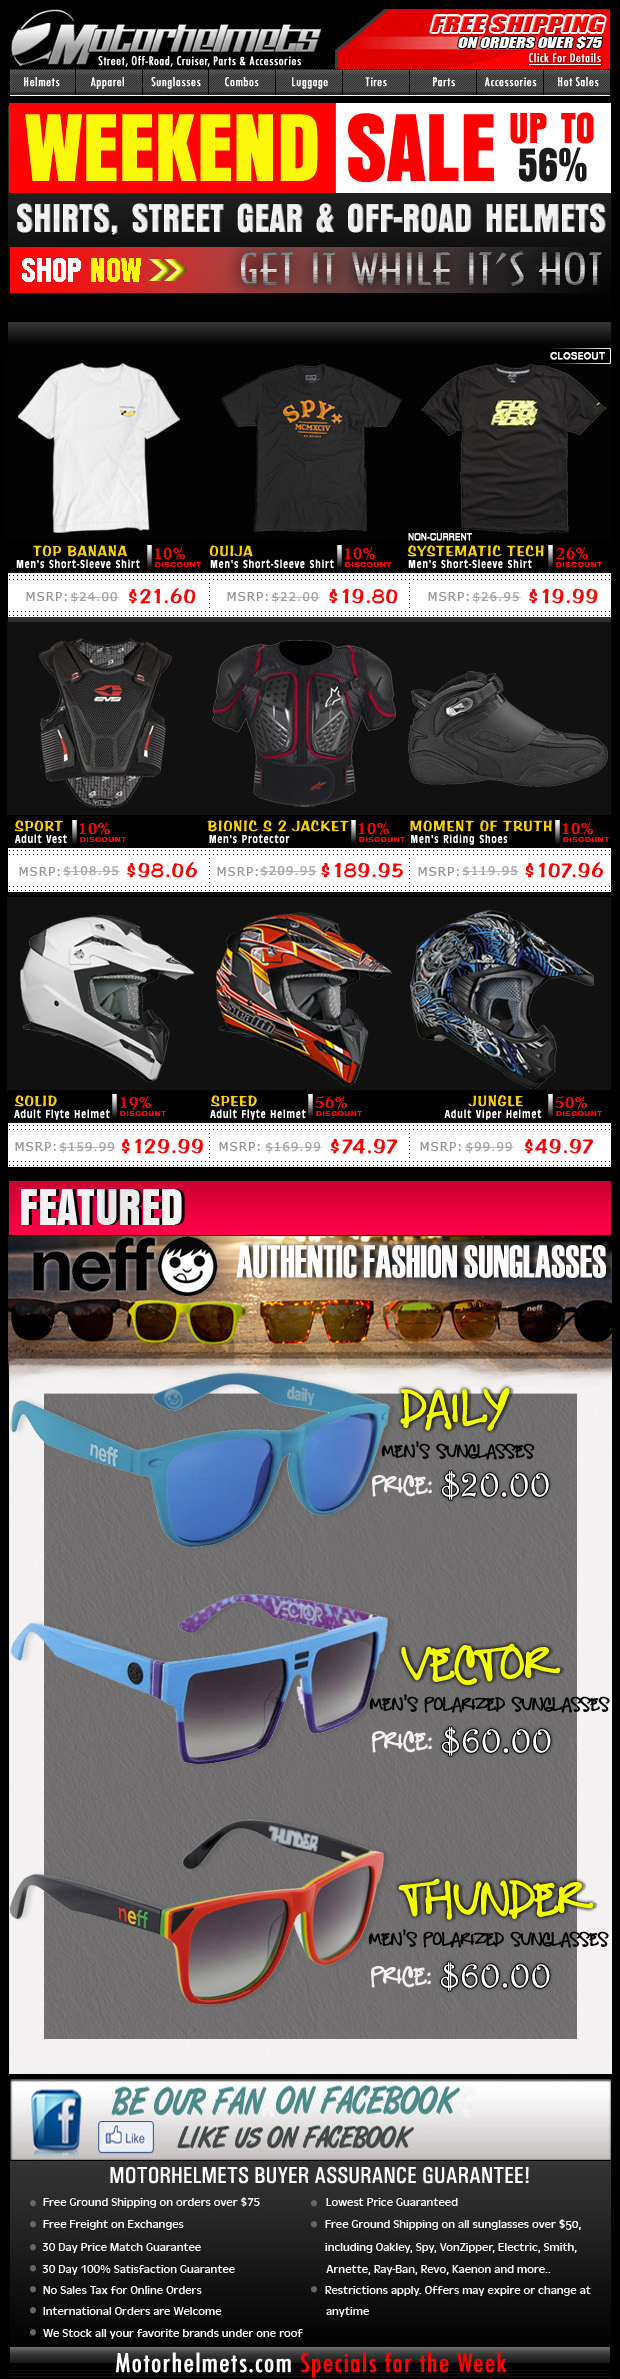 Weekend Sale...up to 56% off on Selected Premium Items from FOX, Spy, VZ and more!